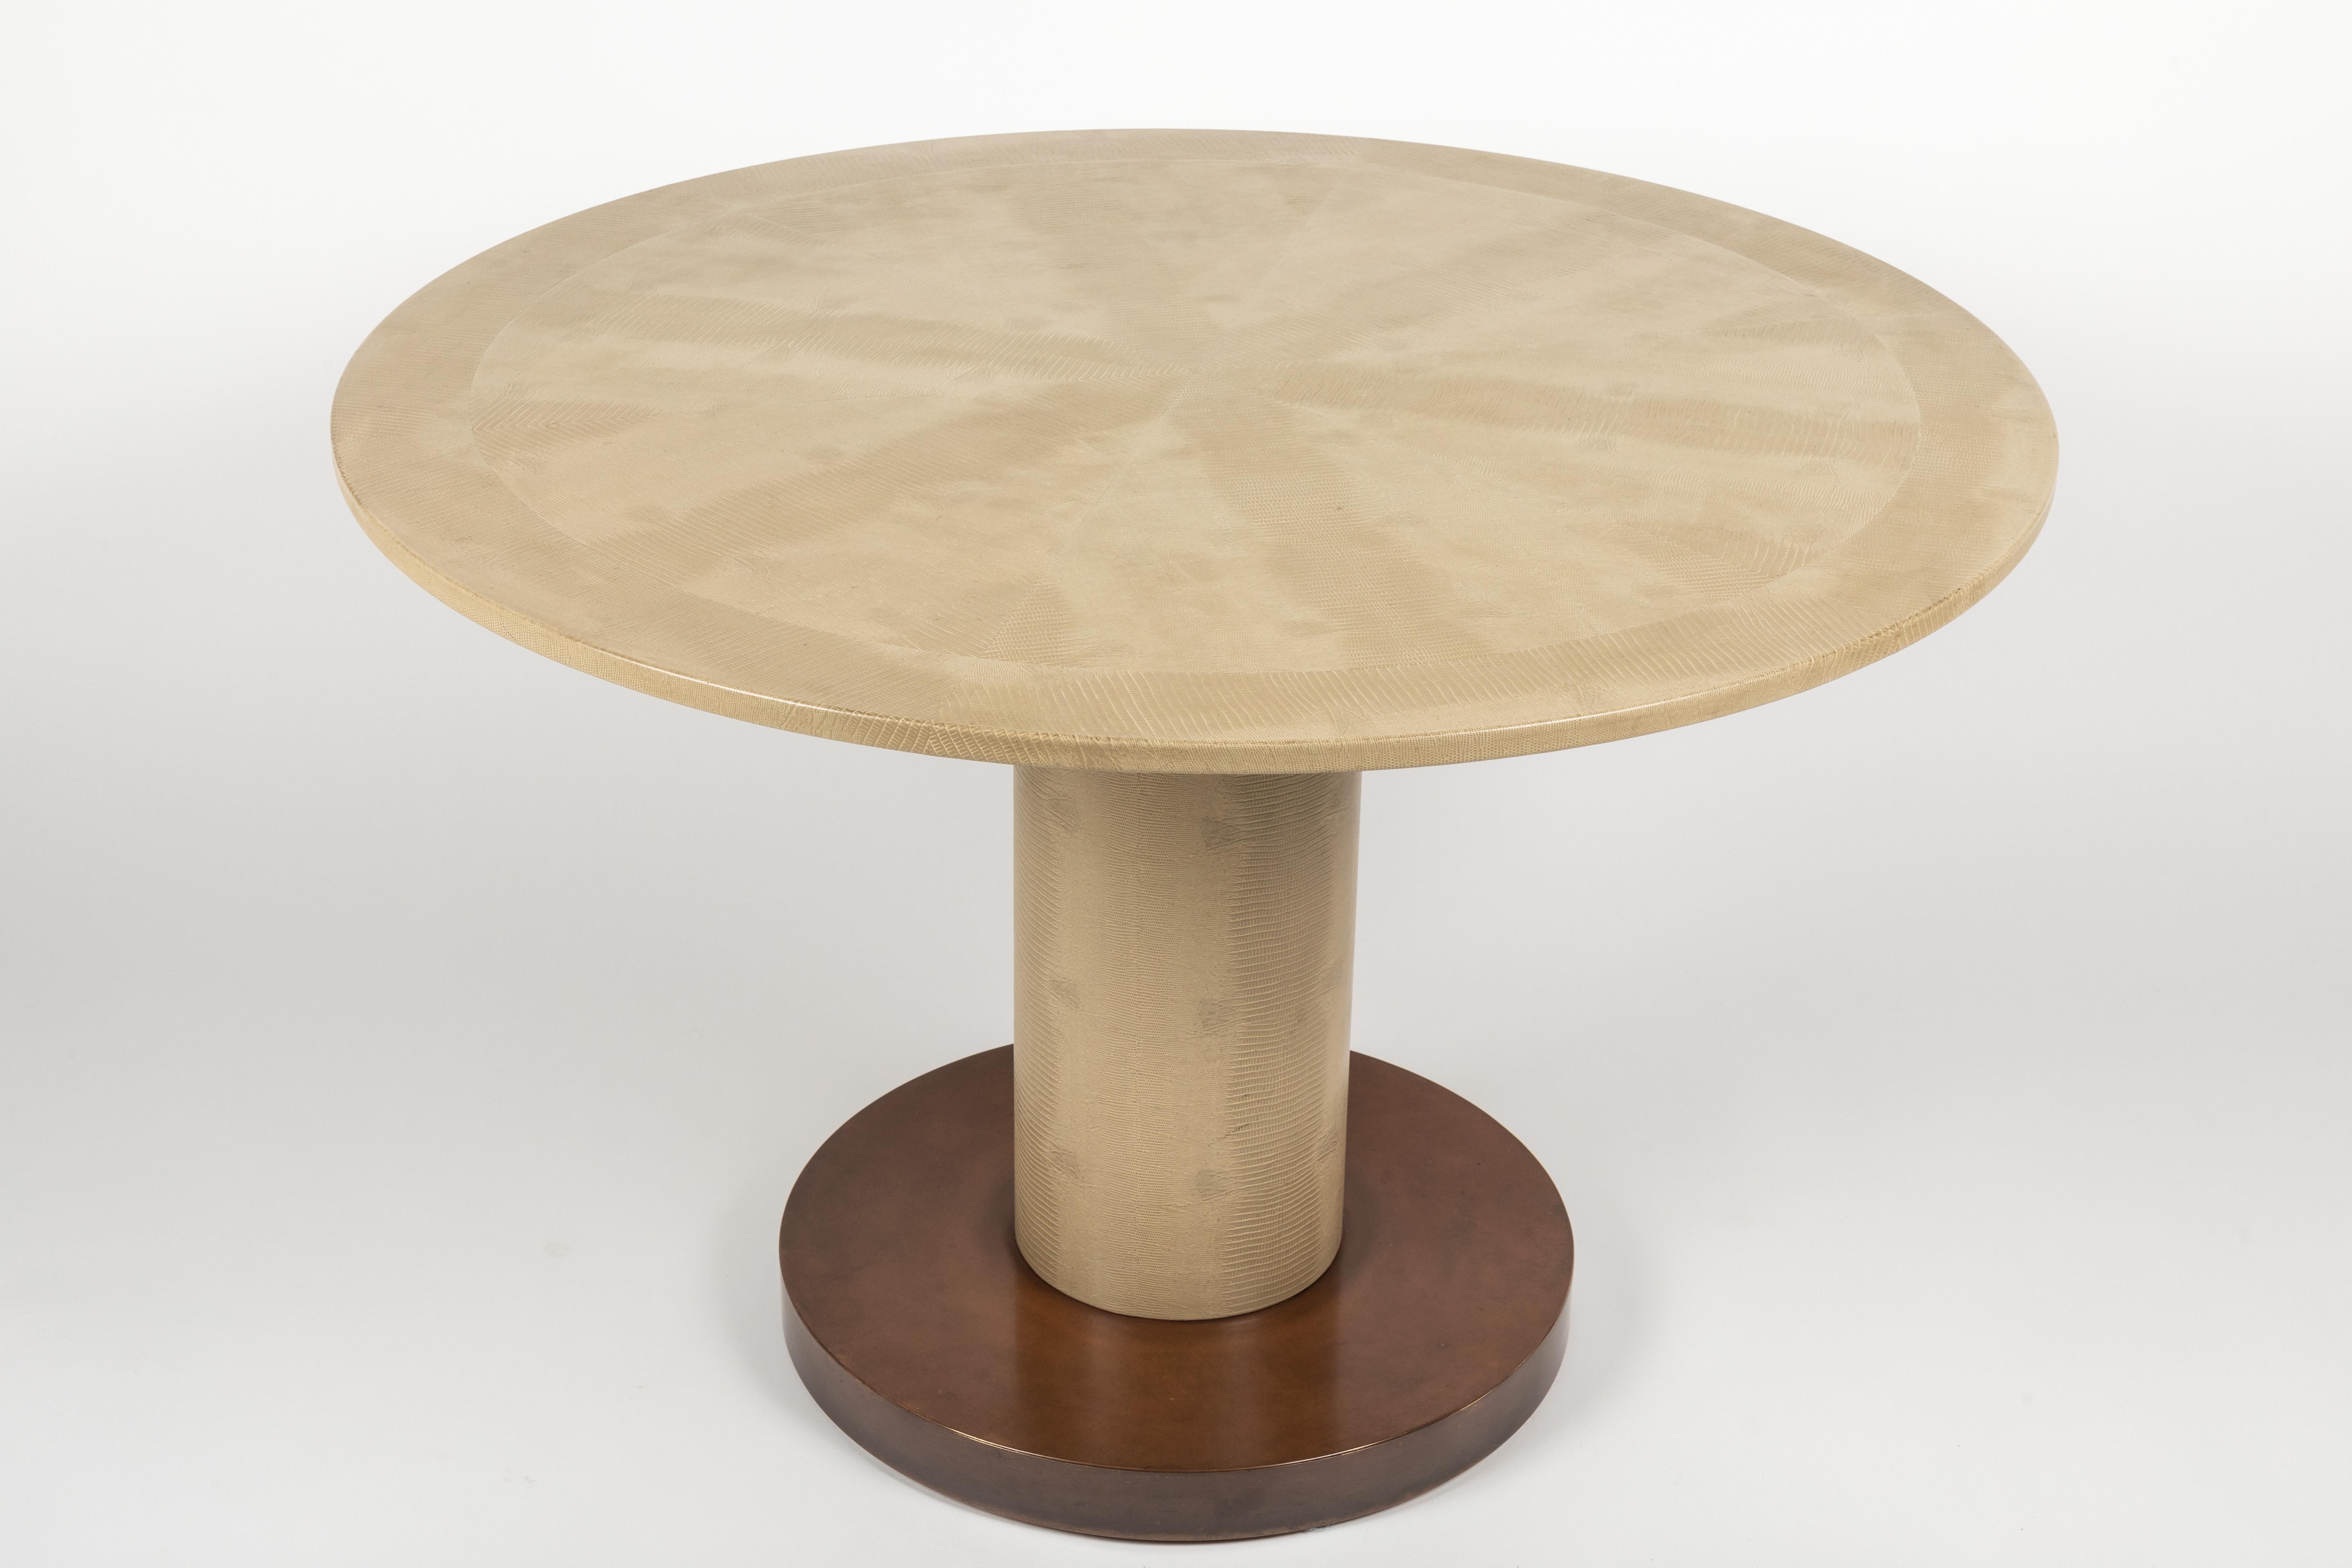 This table, attributed to Karl Springer is an example of quality workmanship. Acquired from a home that included several signed pieces by Springer it seems reasonable that this table is most likely his work. Both the top and column are veneered in